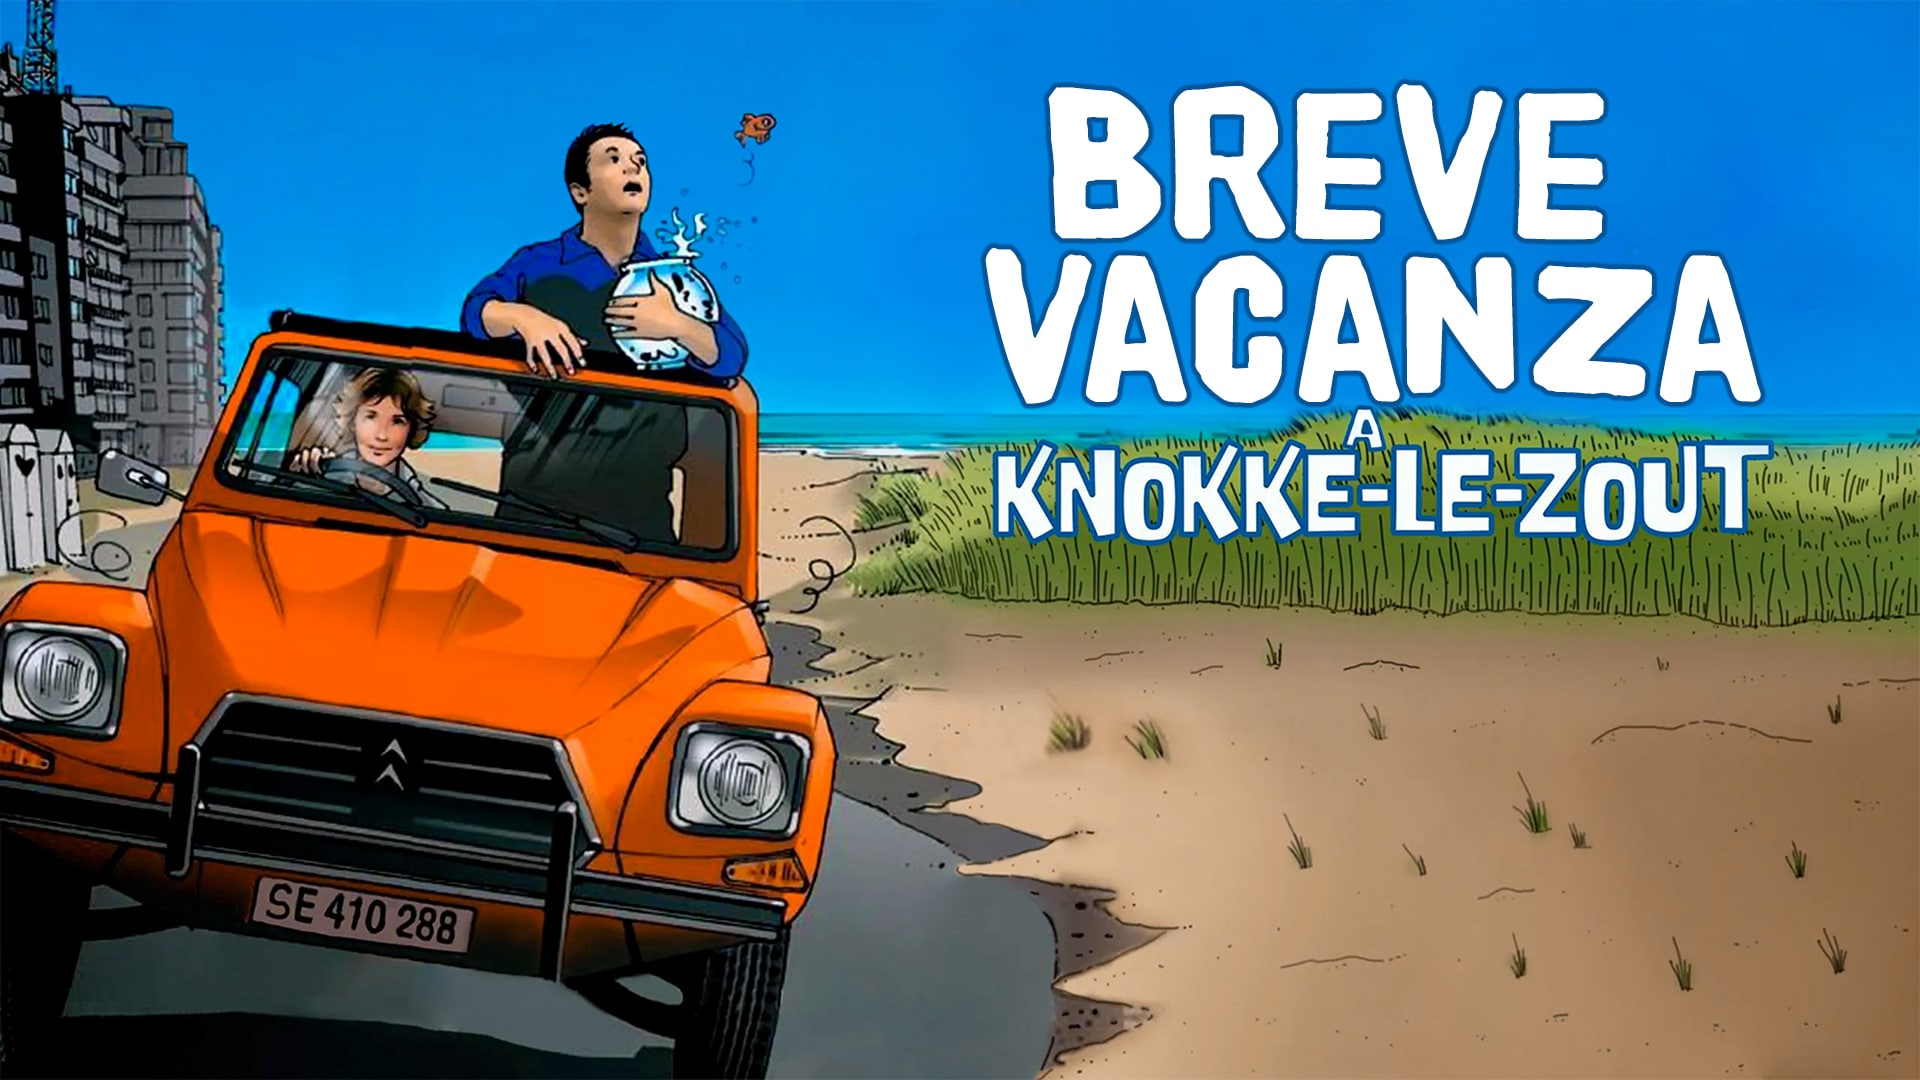 Breve vacanza a Knokke-le-Zout